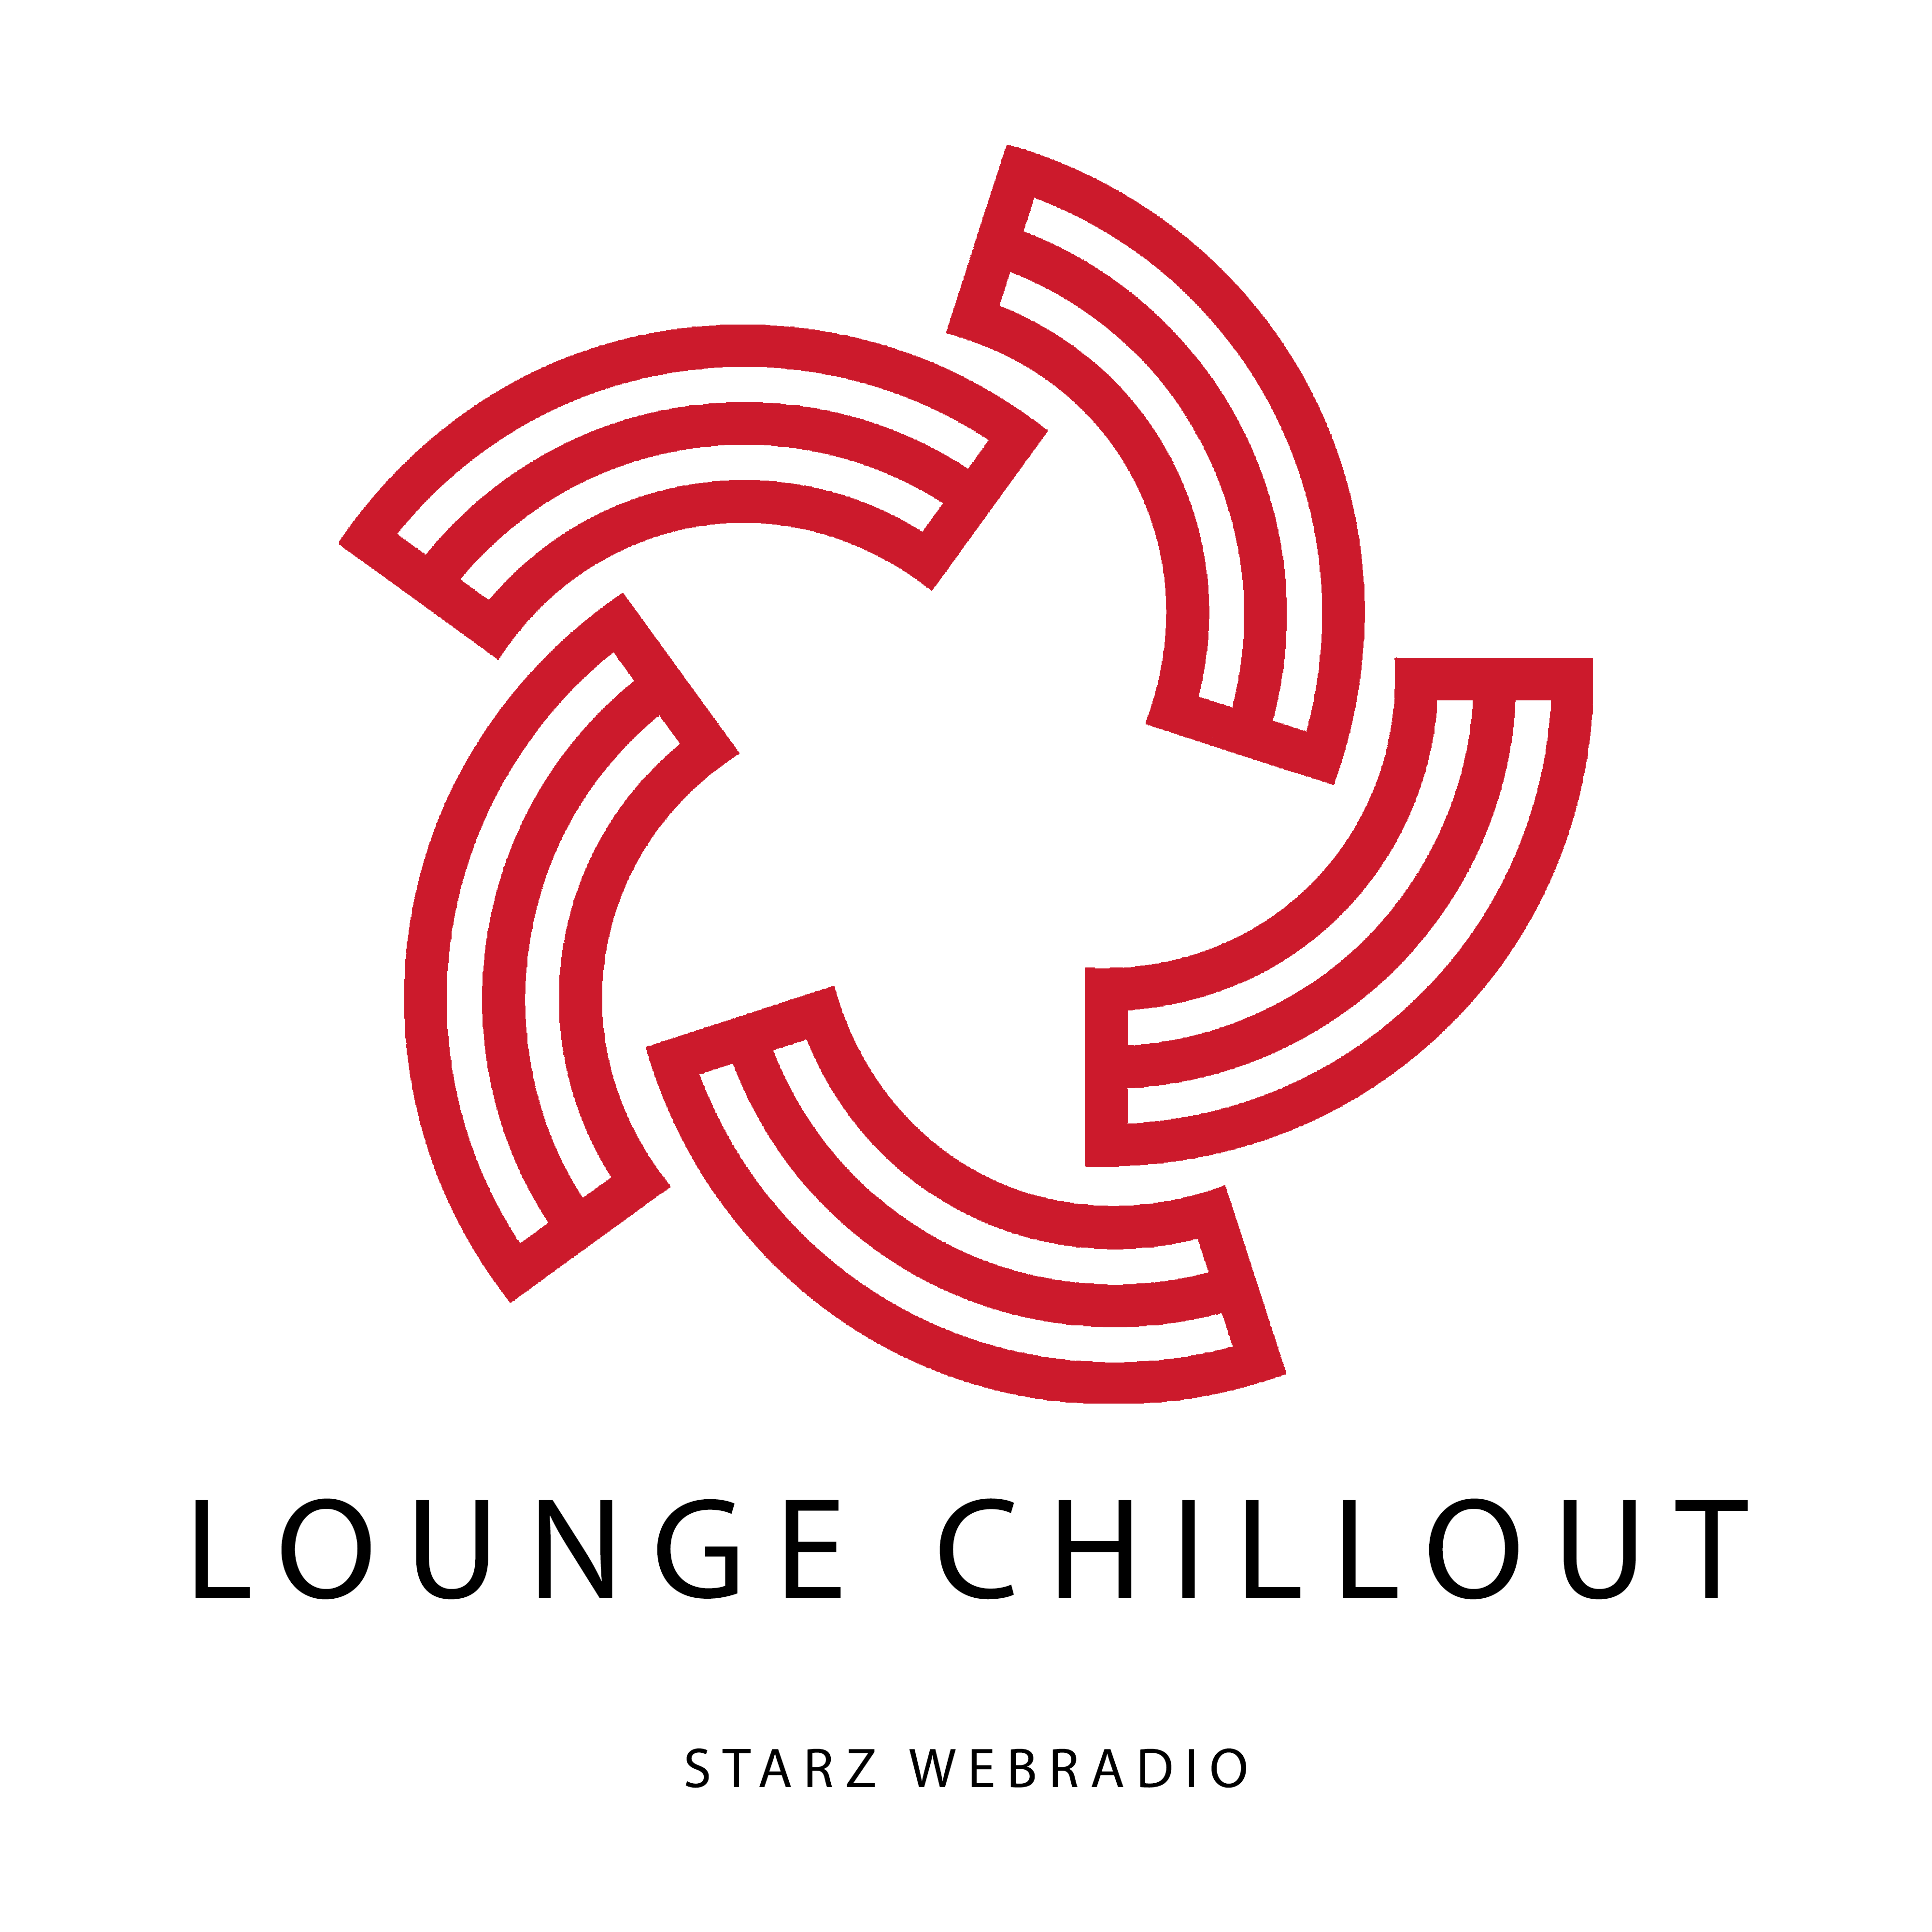 A_A Lounge Chillout